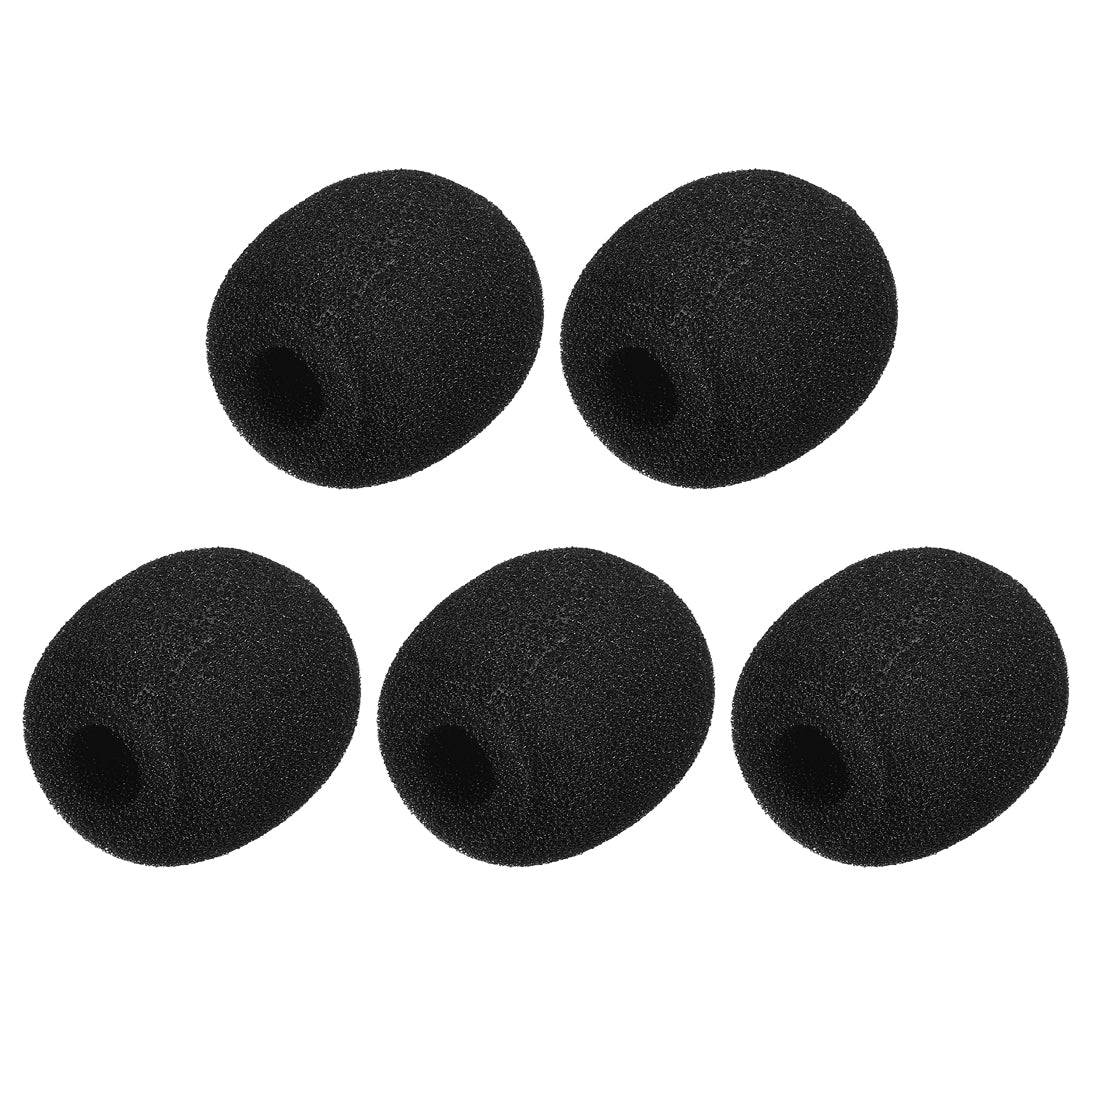 uxcell Uxcell 5PCS Foam Mic Cover Headset Microphone Windscreen Shield Protection Black 30mm Length for Headset Lapel Lavalier